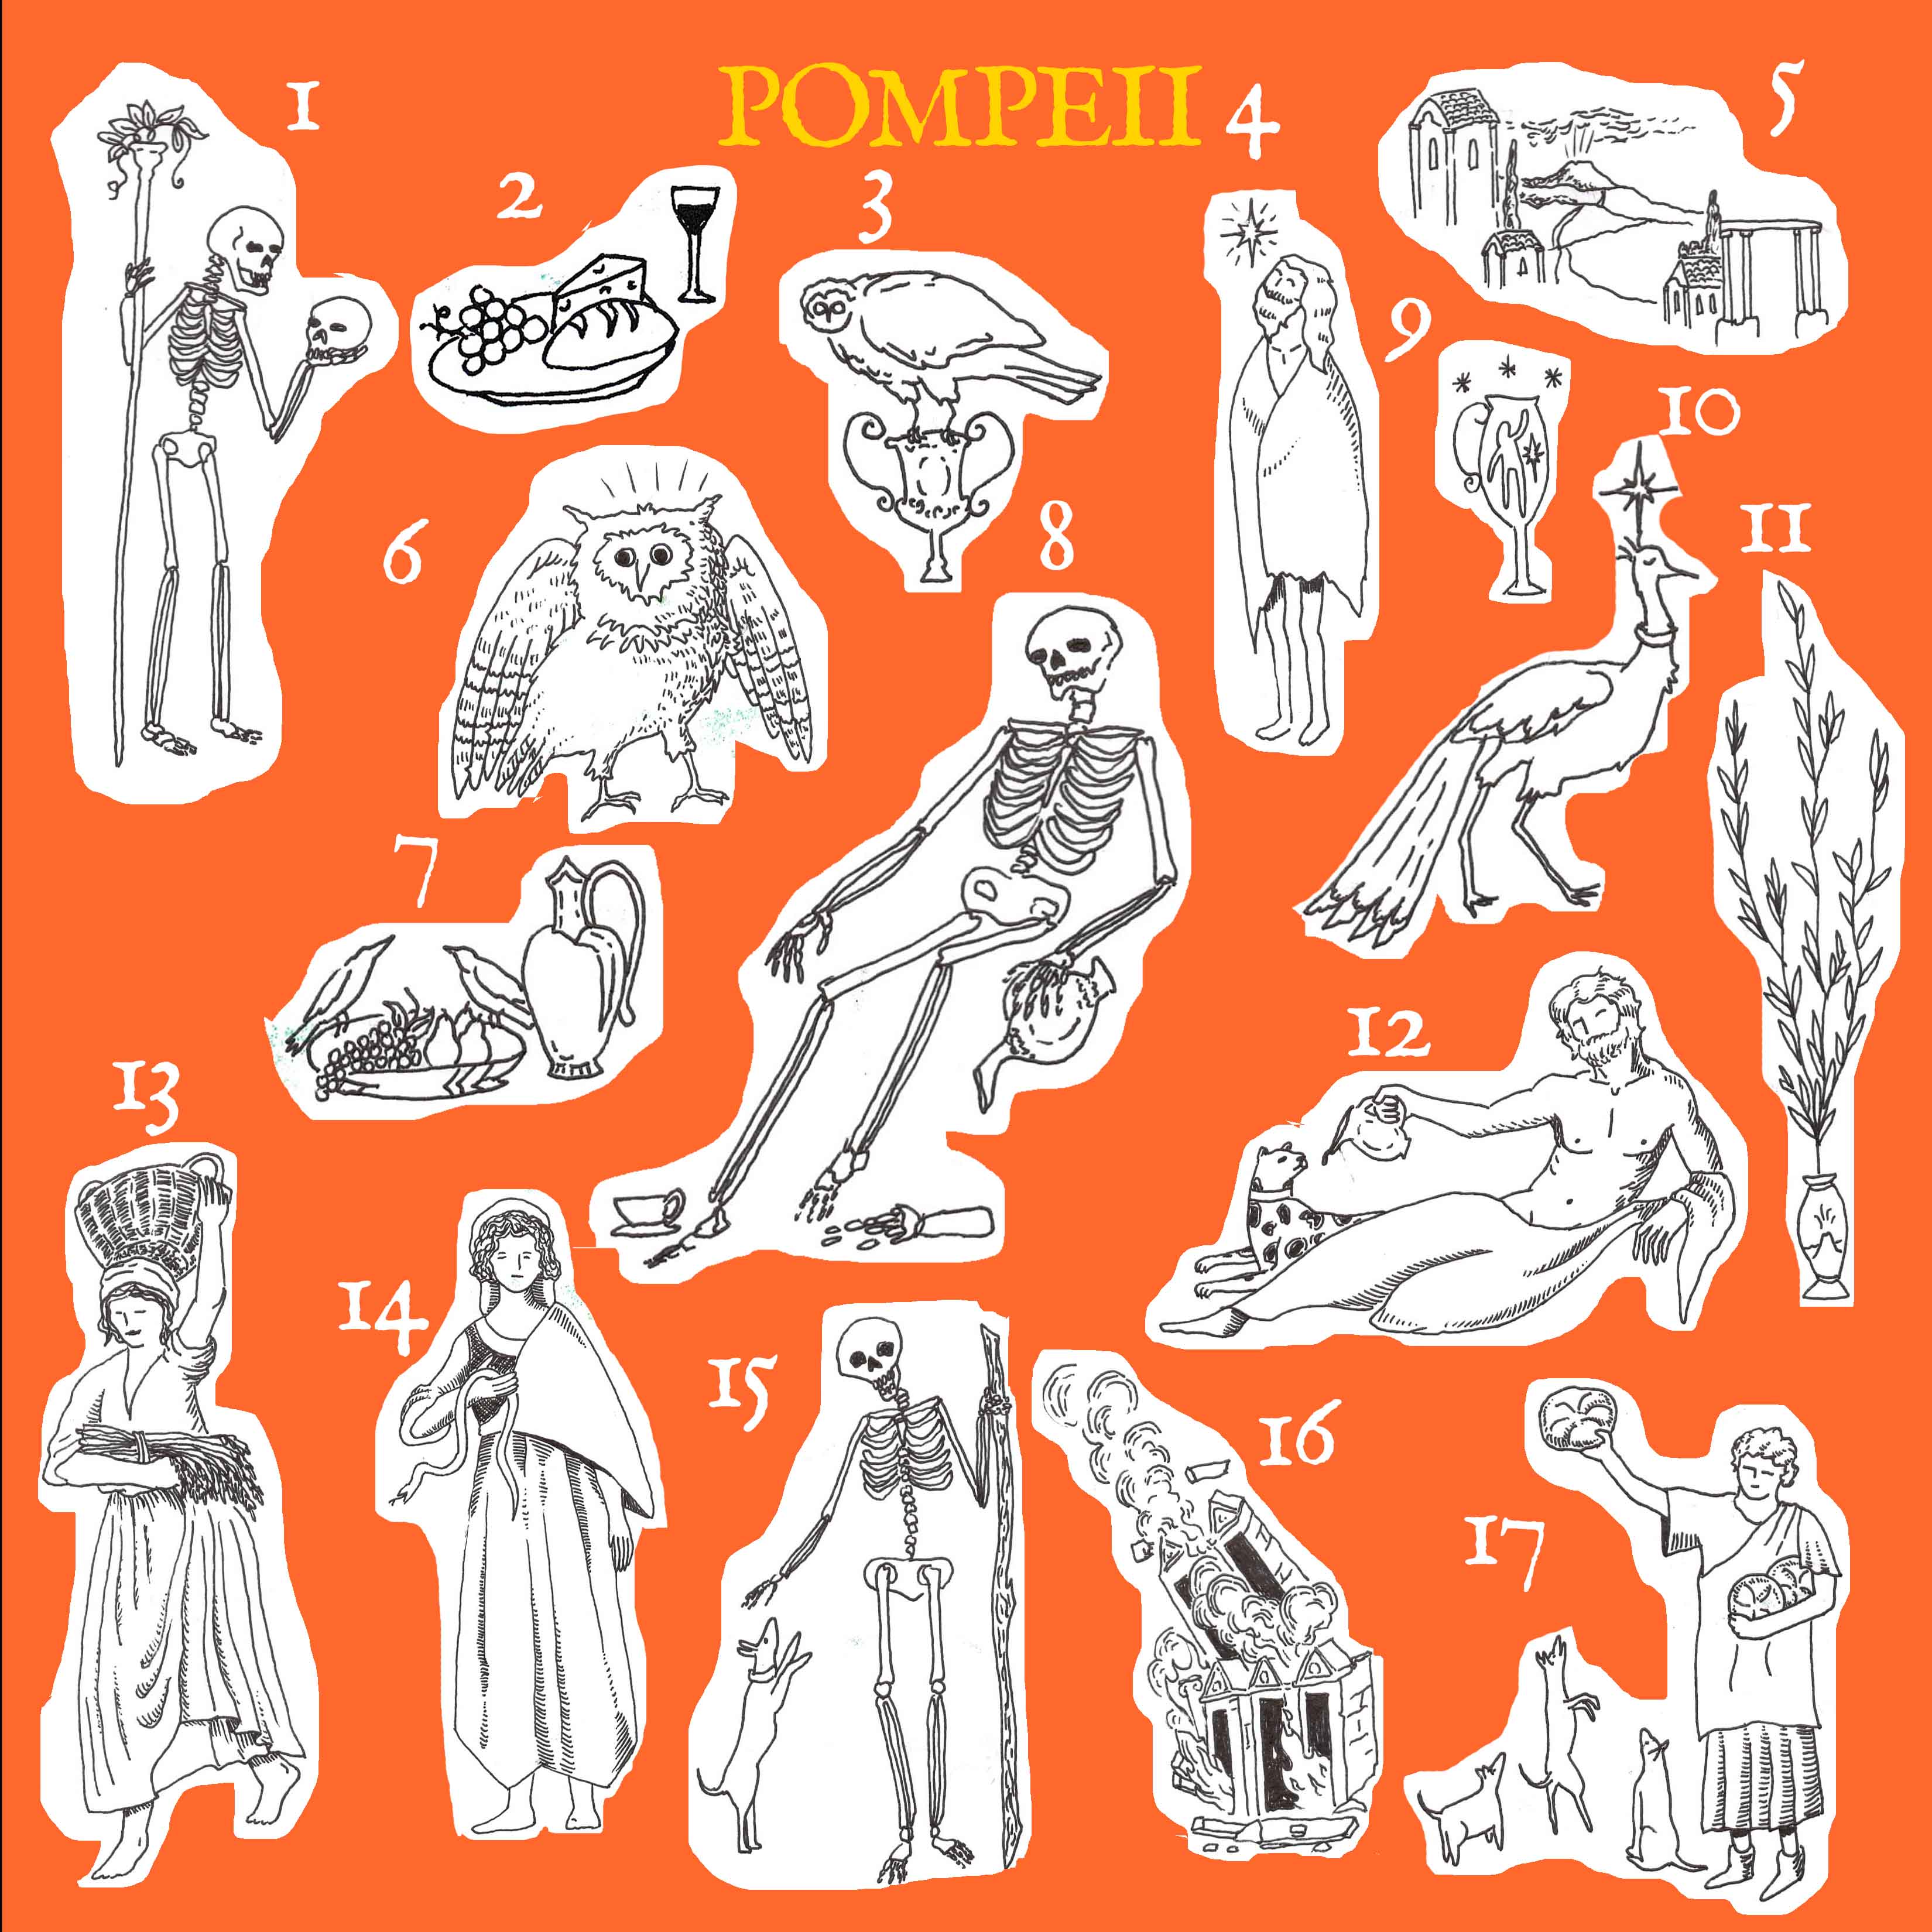 01- a skeleton contemplating, (inspired by a vase from pompeii) 02-a dining scene<br>
03-owl on vase, 04-man without any possessions,05 Pompeii<br>
06-owl, 07-lovely scene, 08-the dead with his treasures<br>
09-goblet, 10-royal bird, 11-ornamental plant<br>
12- bacchus god of wine, 13-working woman, 14-girl with snake<br>
15- dead and his dog (inspired by a vase from pompeii)<br>
16-crumbling building, 17-man teasing dogs with bread 
